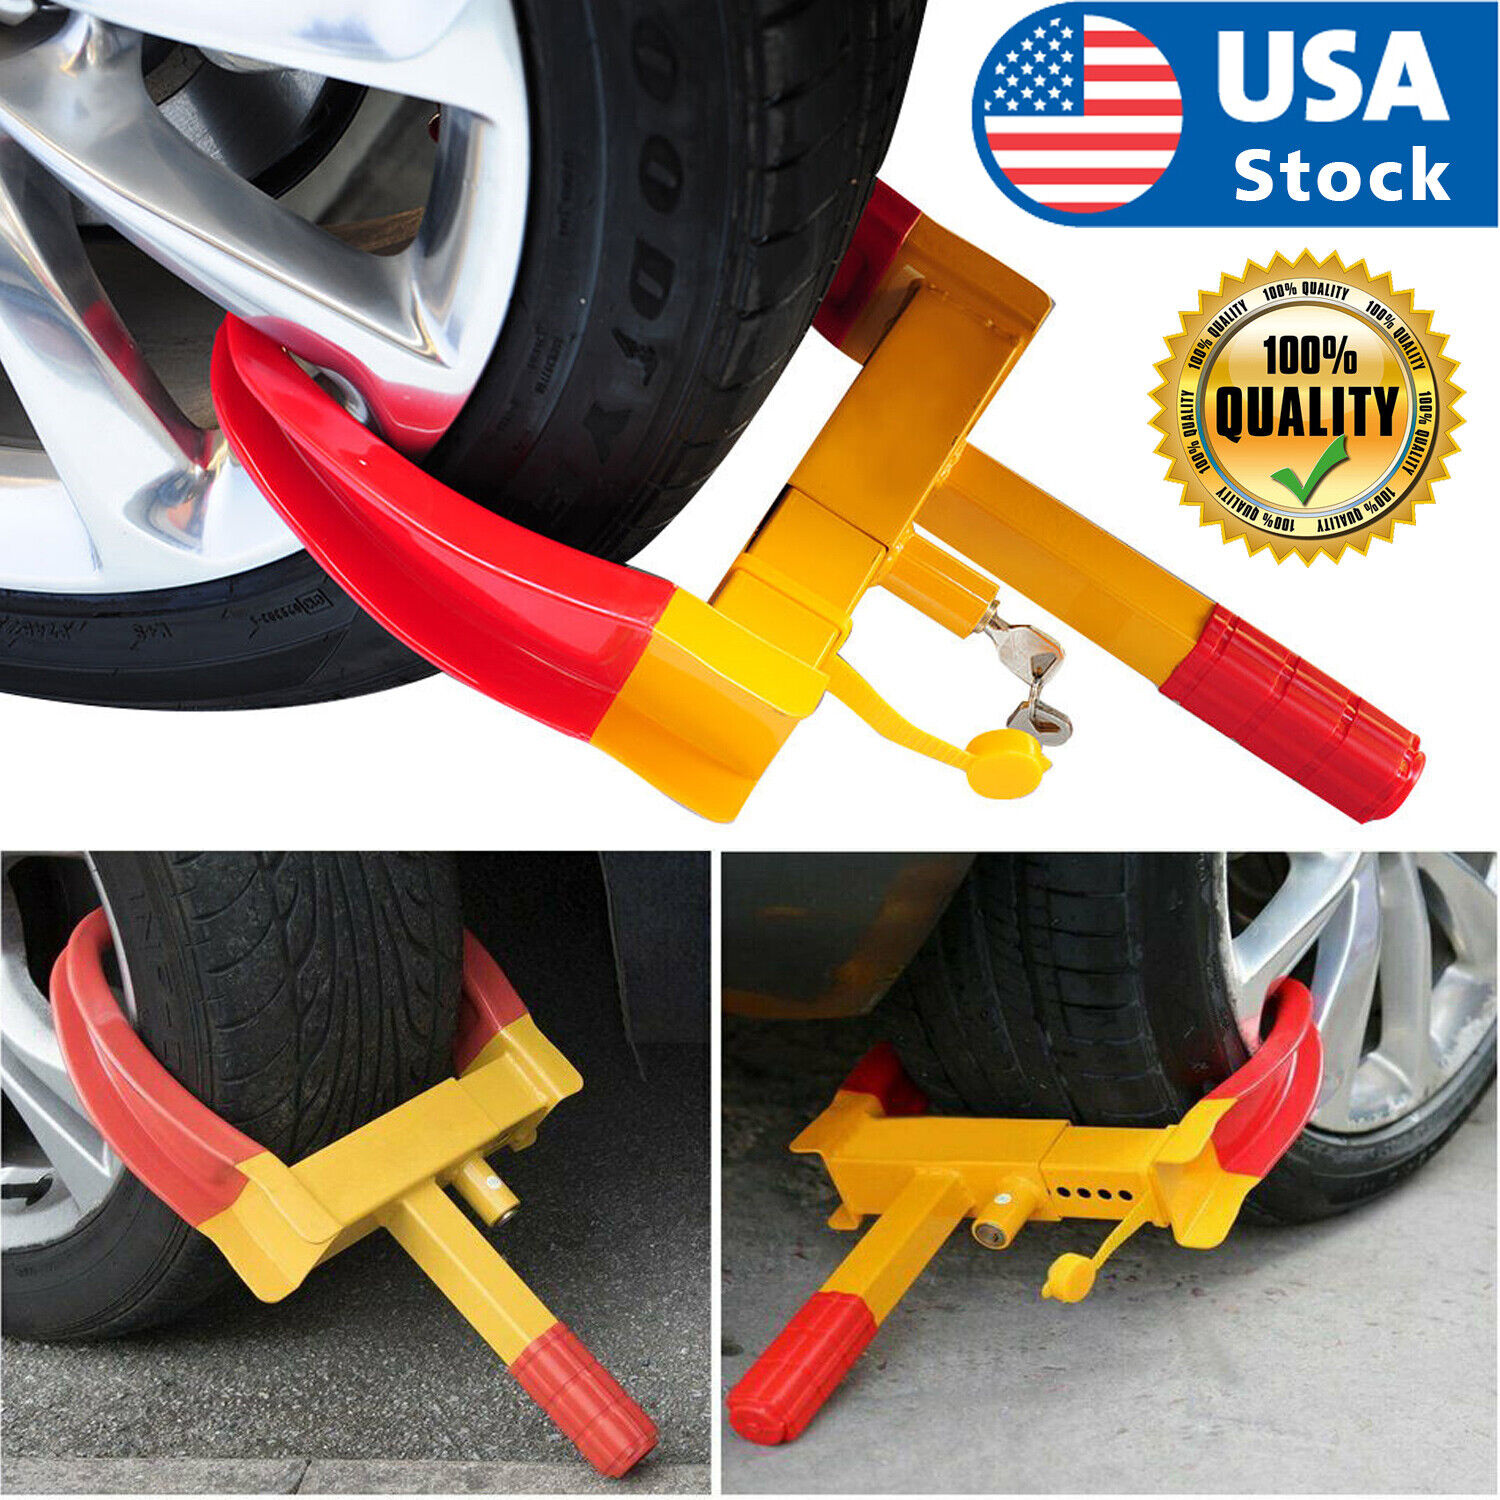 USA Anti Theft Wheel Lock Clamp Boot Tire Claw Trailer Auto Car Truck Towing